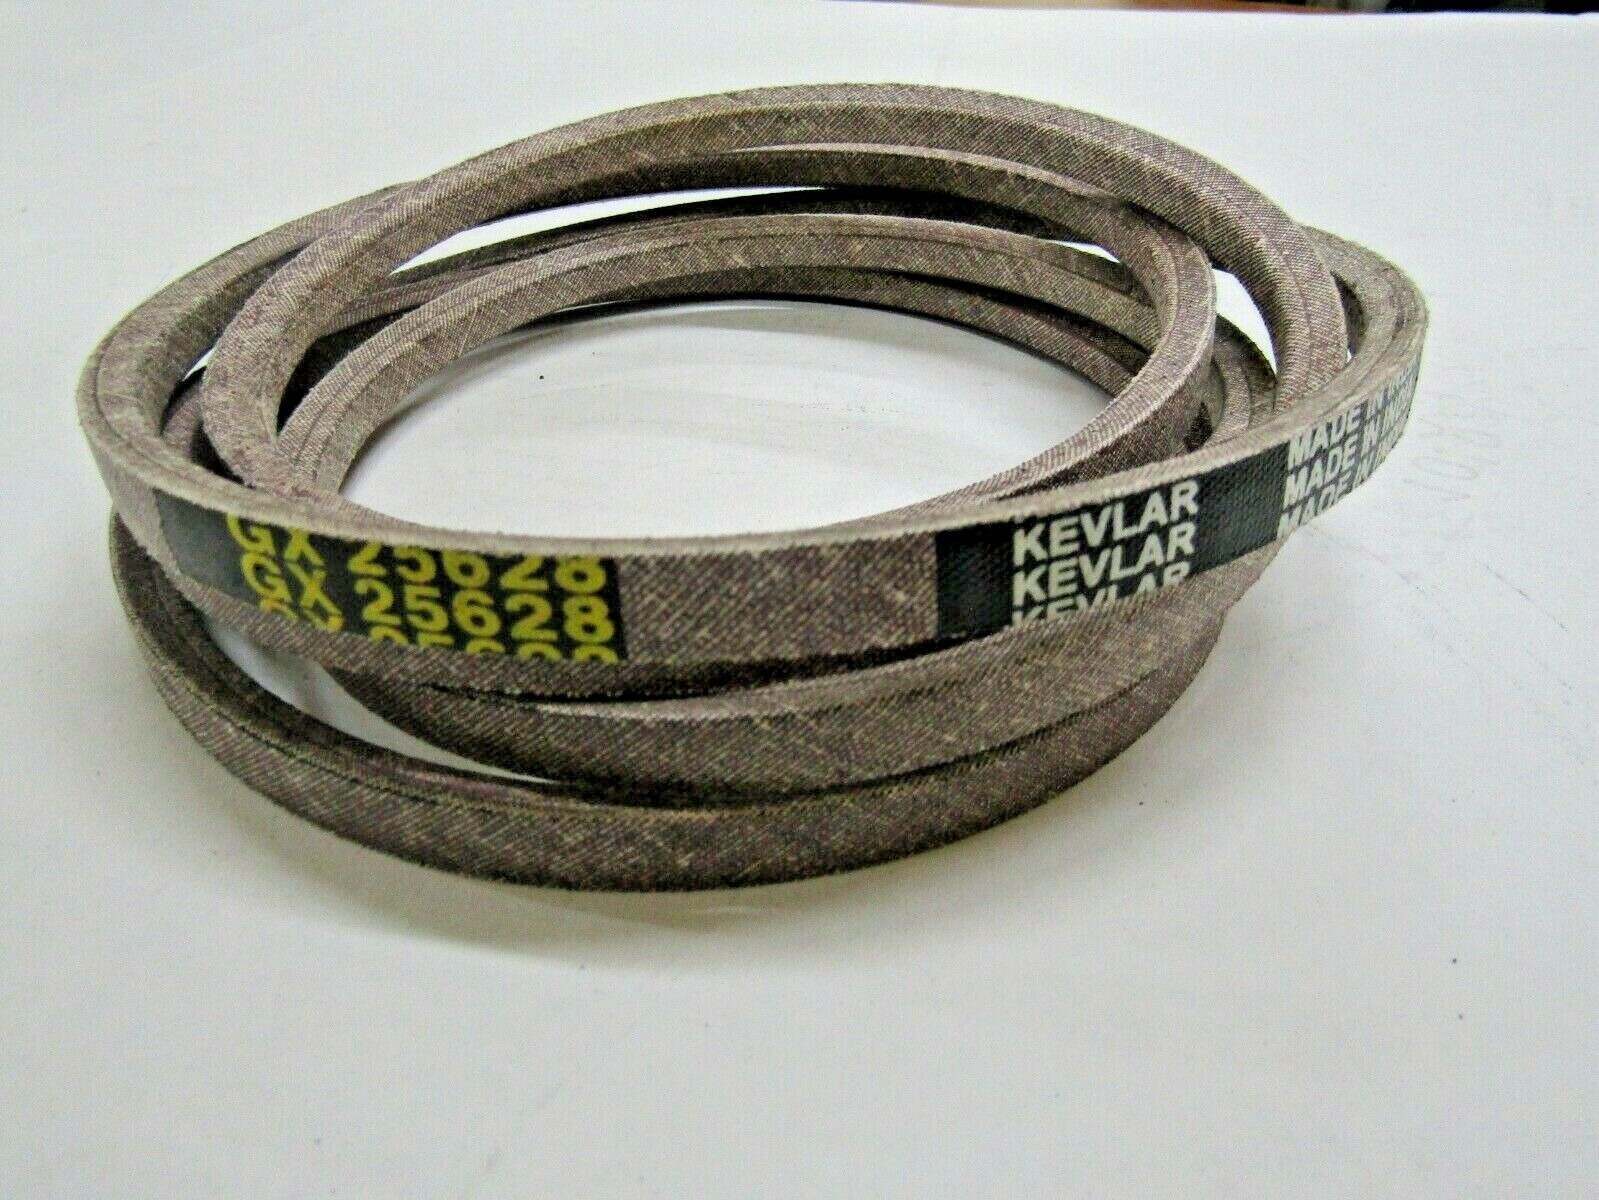 Spec belt will fit JOHN DEERE GX25628 Z335E Z335M Z345M Z345R WITH 42" DECK - 0